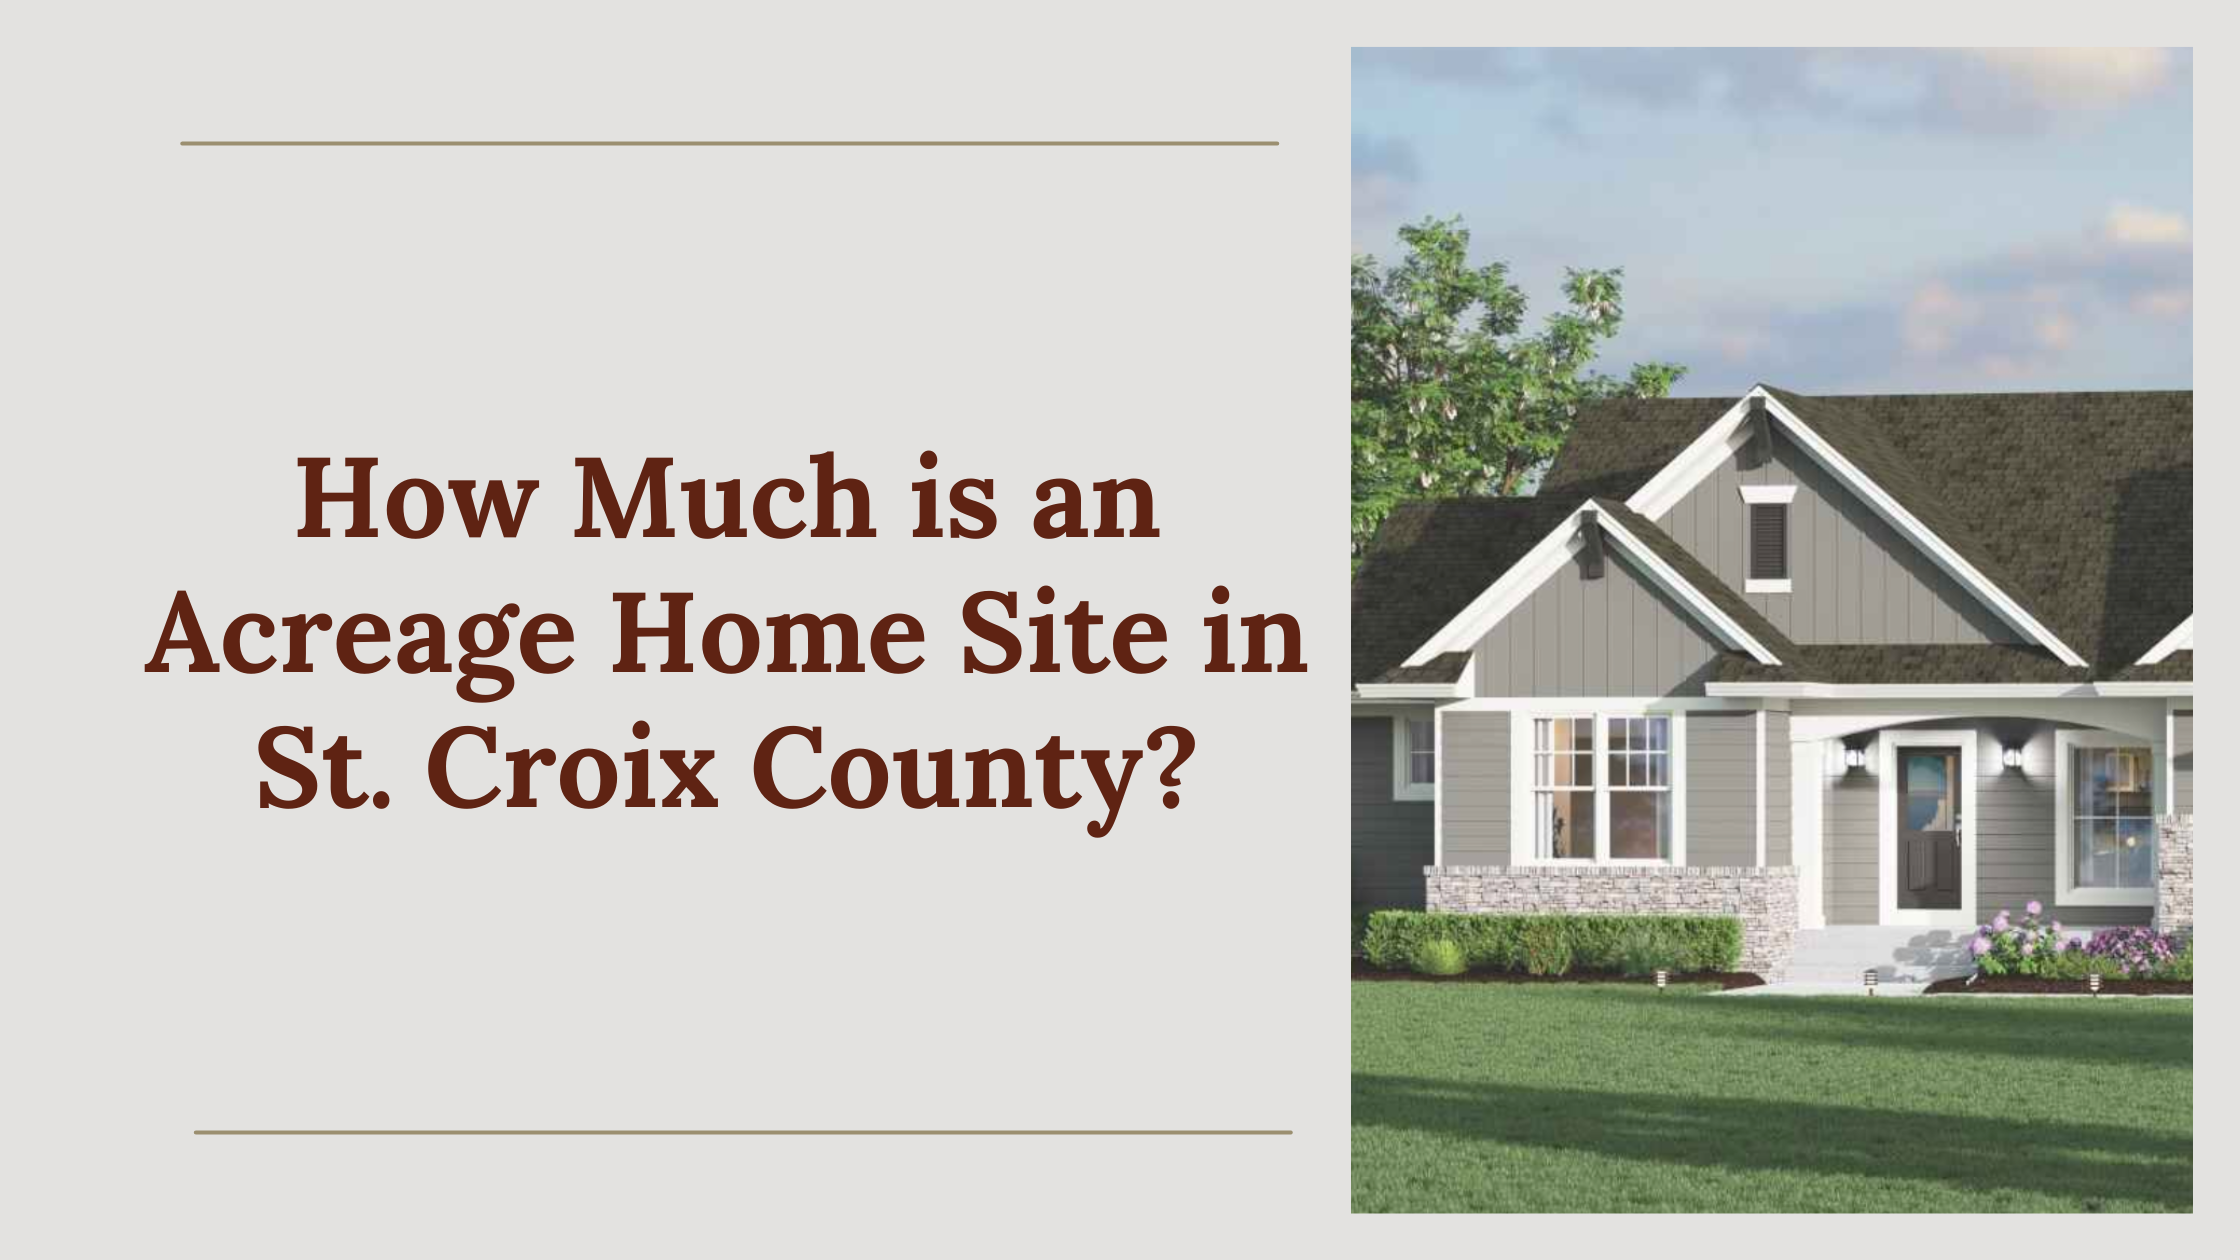 How Much is an Acreage Home Site in St. Croix County?